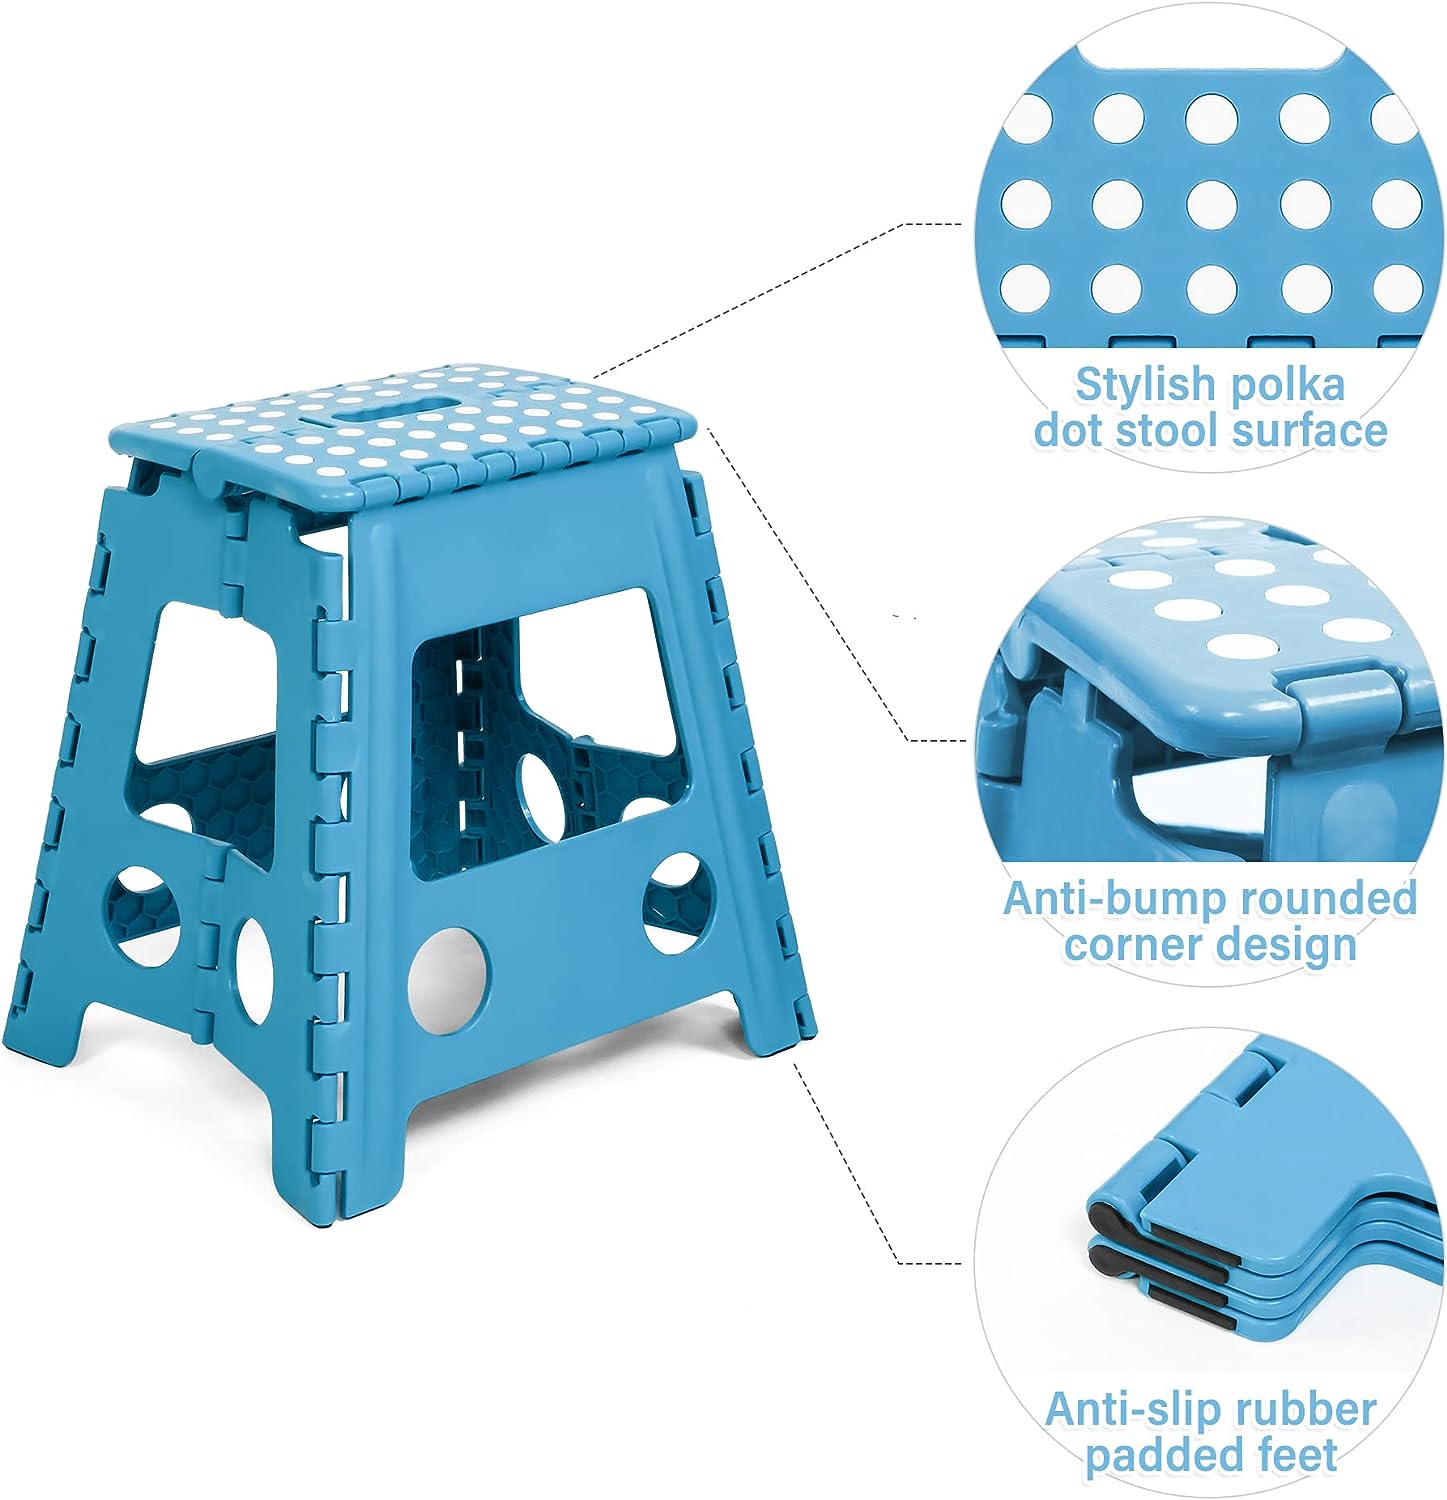 Set of 2 Folding Step Stool 15.7" with Non-Slip Surface and Portable Handle, Blue